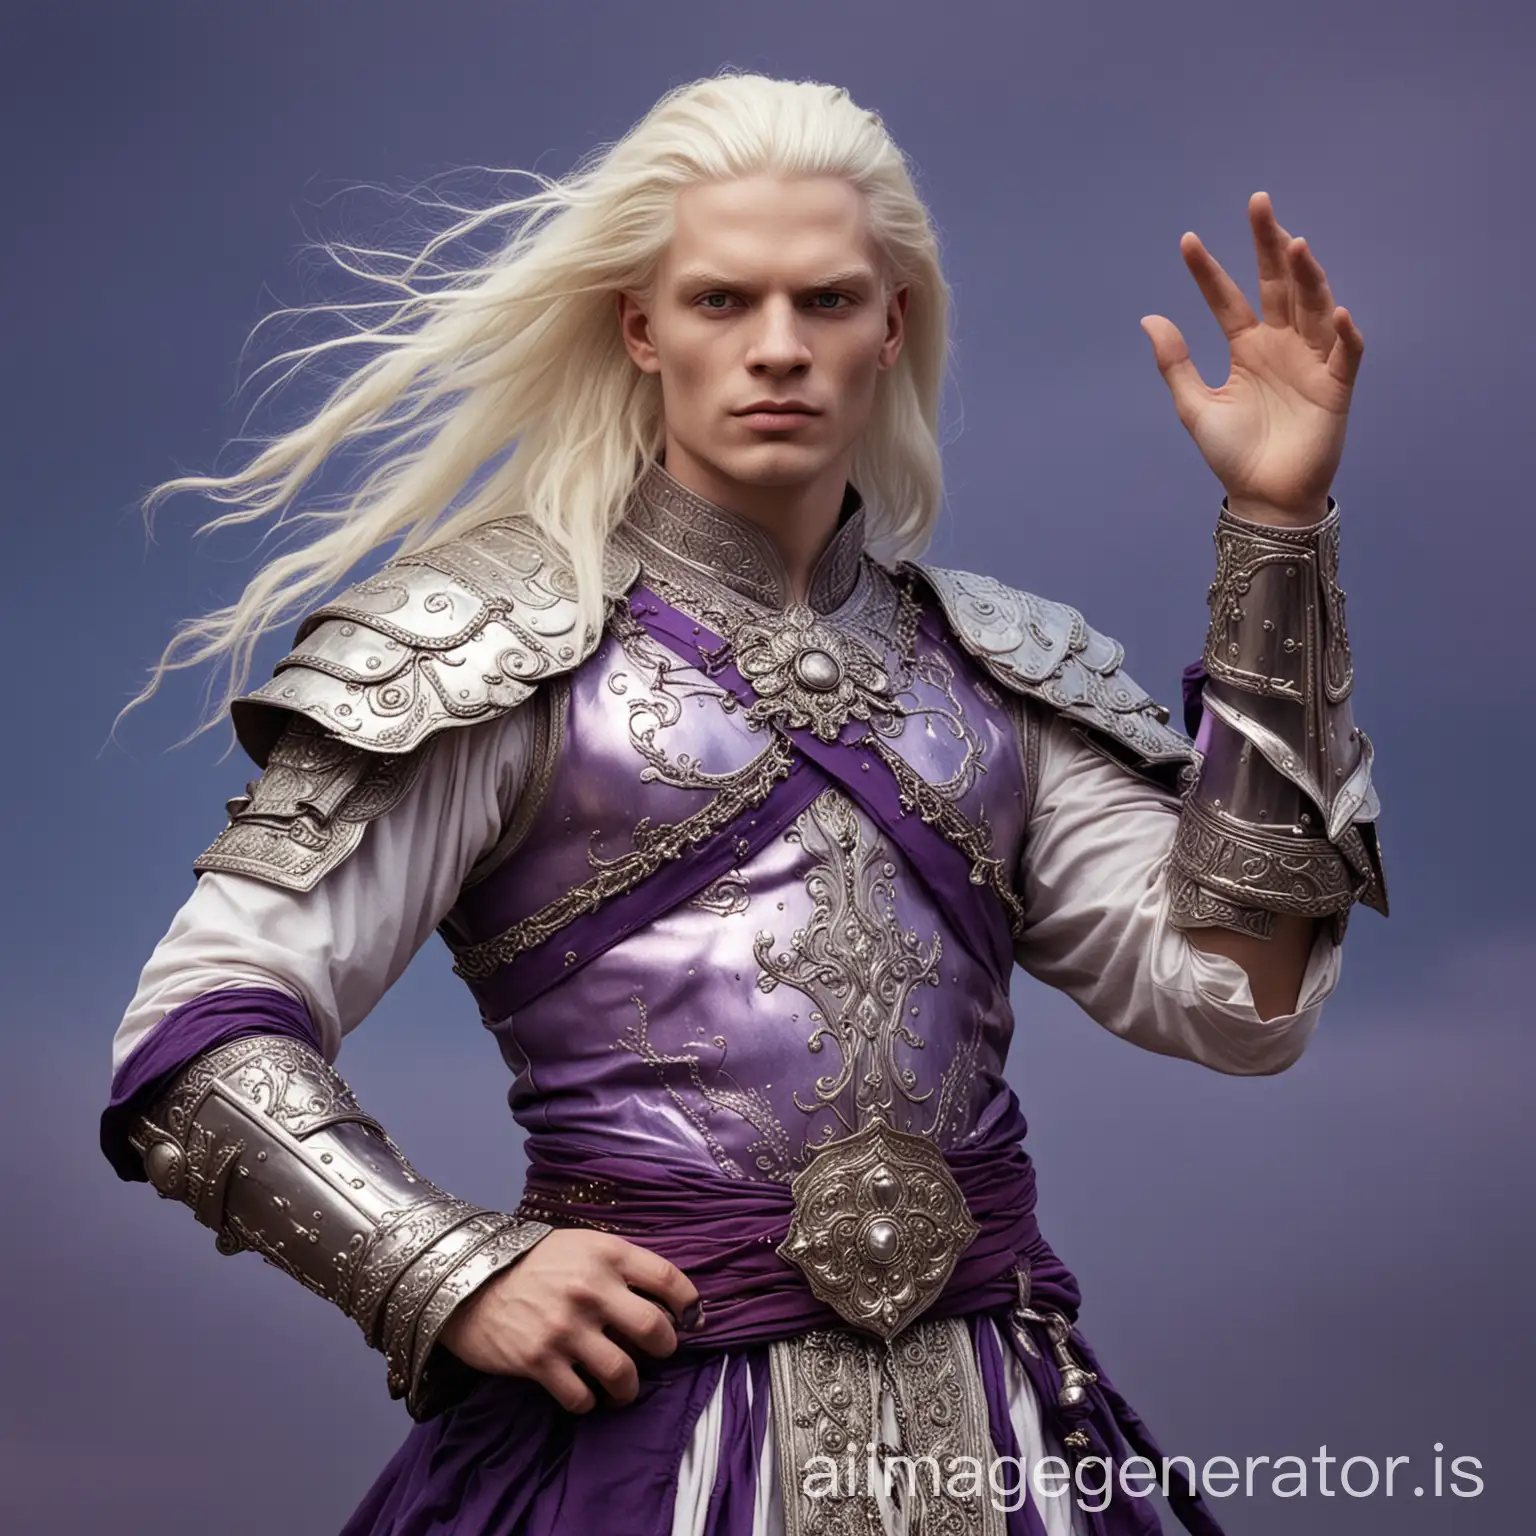 Ancient mythical photograph. albino. natural face. A 35 yearold man. Strong arms musels. Very big arms. He has beautiful face. He has semi-long hair. a Indian man. white hair, purple eyes. violet Armor. violet metal. He has an ancient violet belt. A strong man with strong arms. Tall guy. A glorious man who held the violet scepter with his strong hand. love and enthusiasm violet dress. Blue Clouds background. Wind blowing behind him.